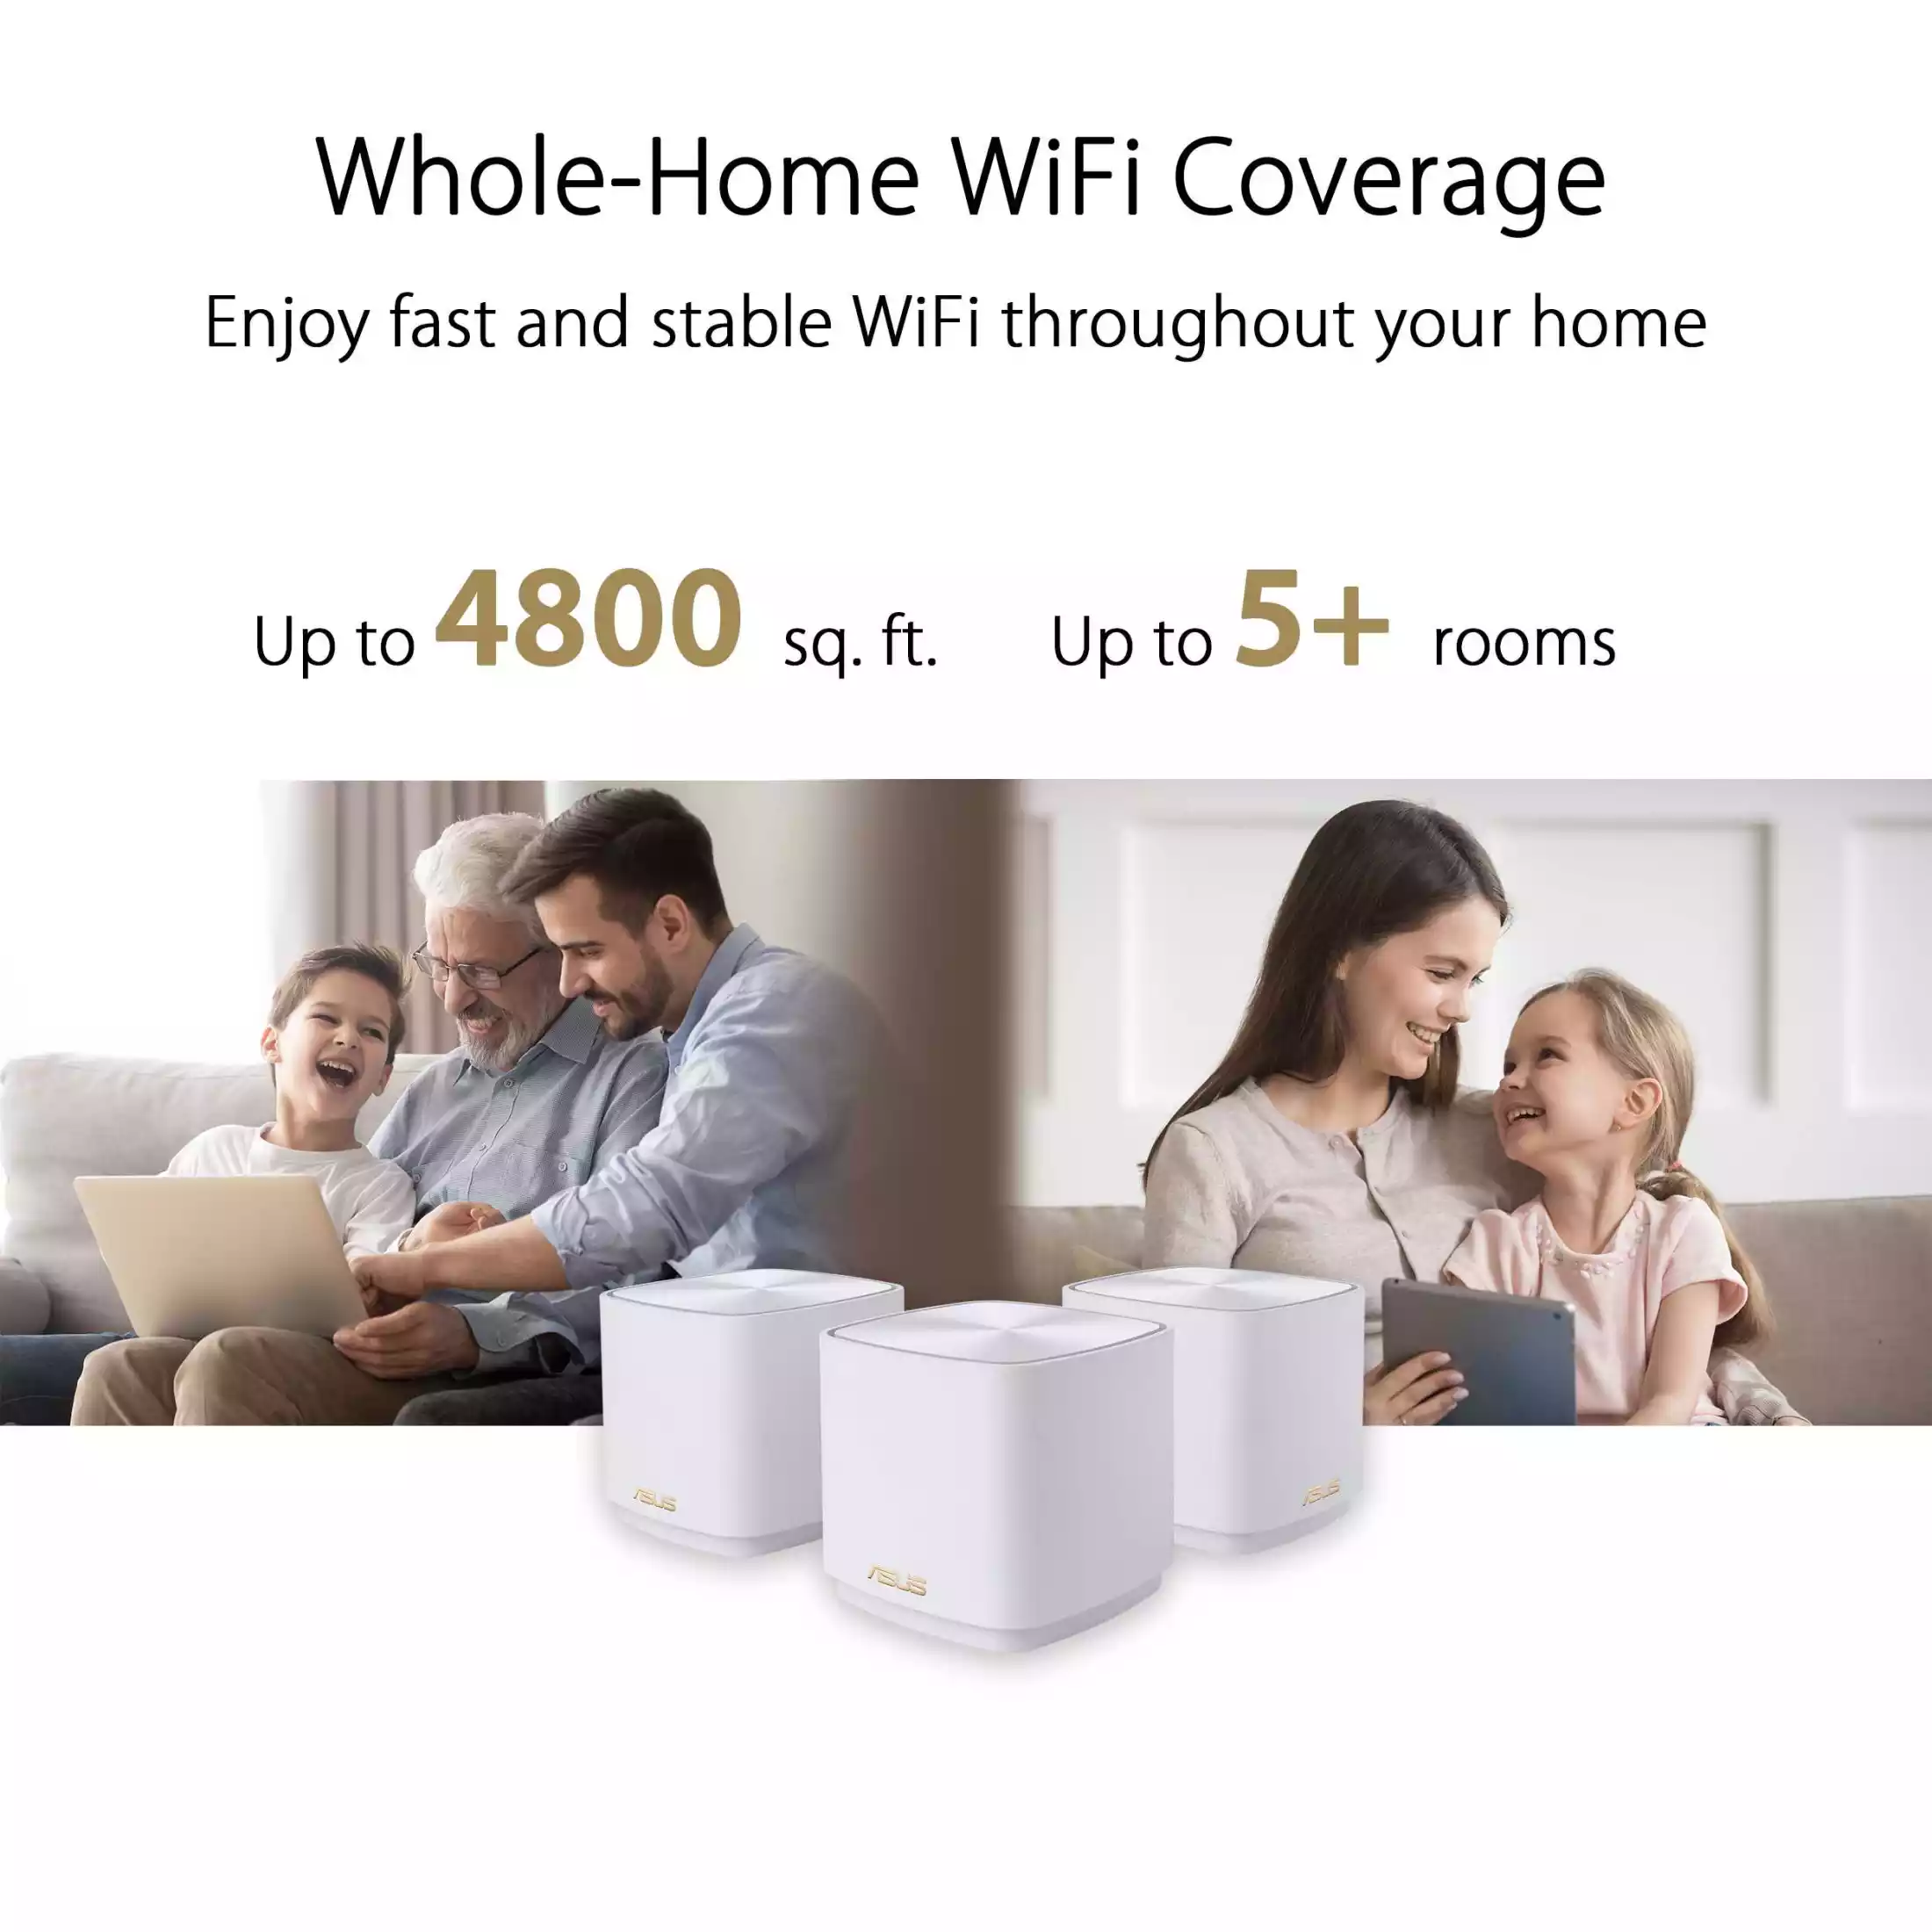 ASUS ZenWiFi AX Mini Mesh WiFi 6 System 2-PACK, Black (AX1800 XD4 2PK) - Whole Home Coverage up to 4800 sq.ft & 5+ rooms, AiMesh, Included Lifetime Internet Security, Easy Setup, Parental Control